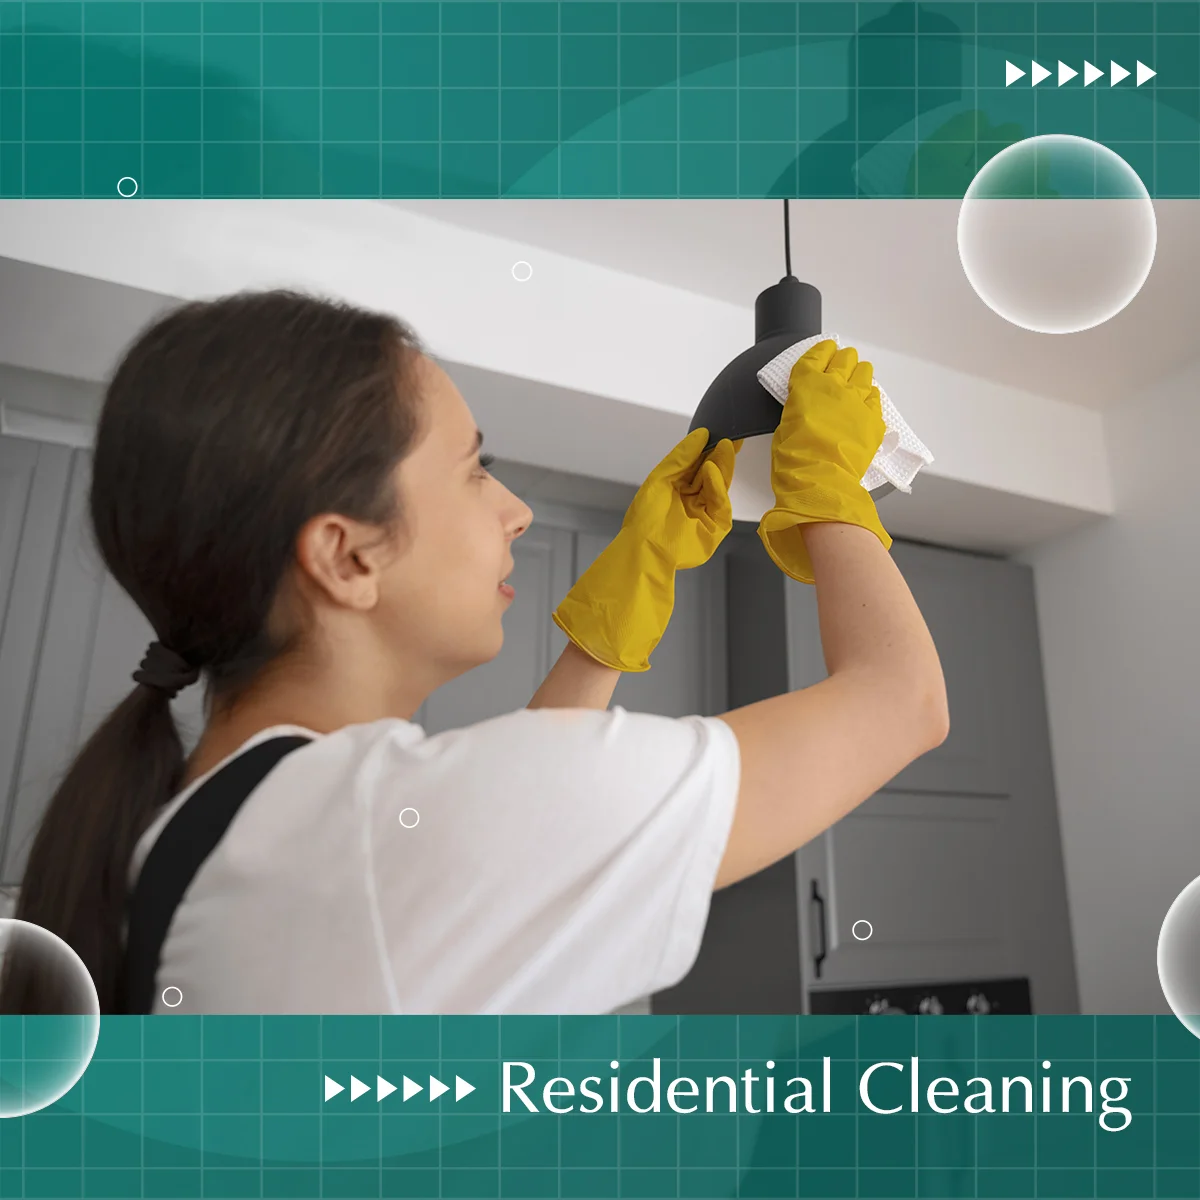 Residential home cleaning service dubai